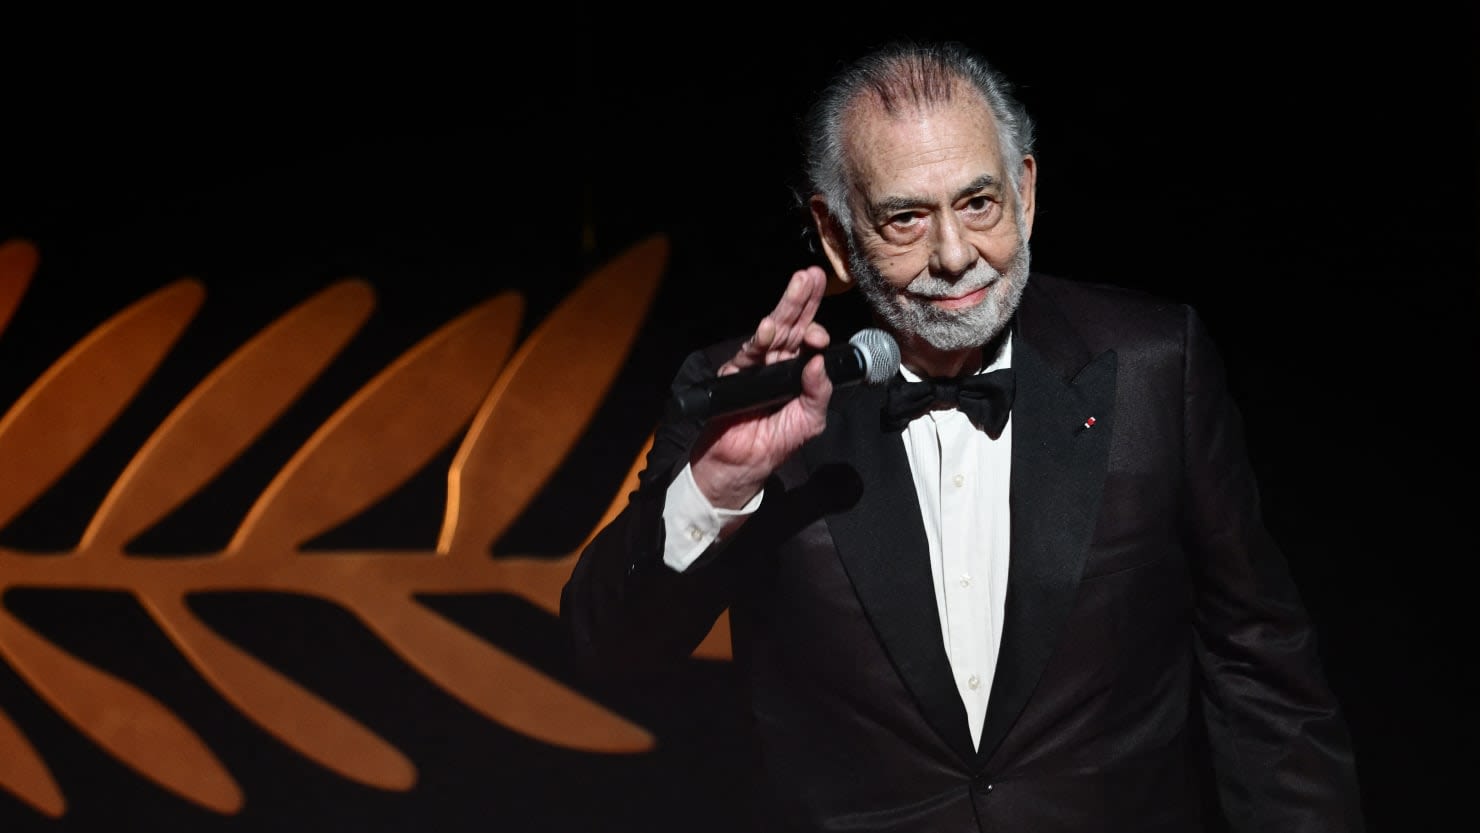 Video of Francis Ford Coppola Kissing Extra Revealed